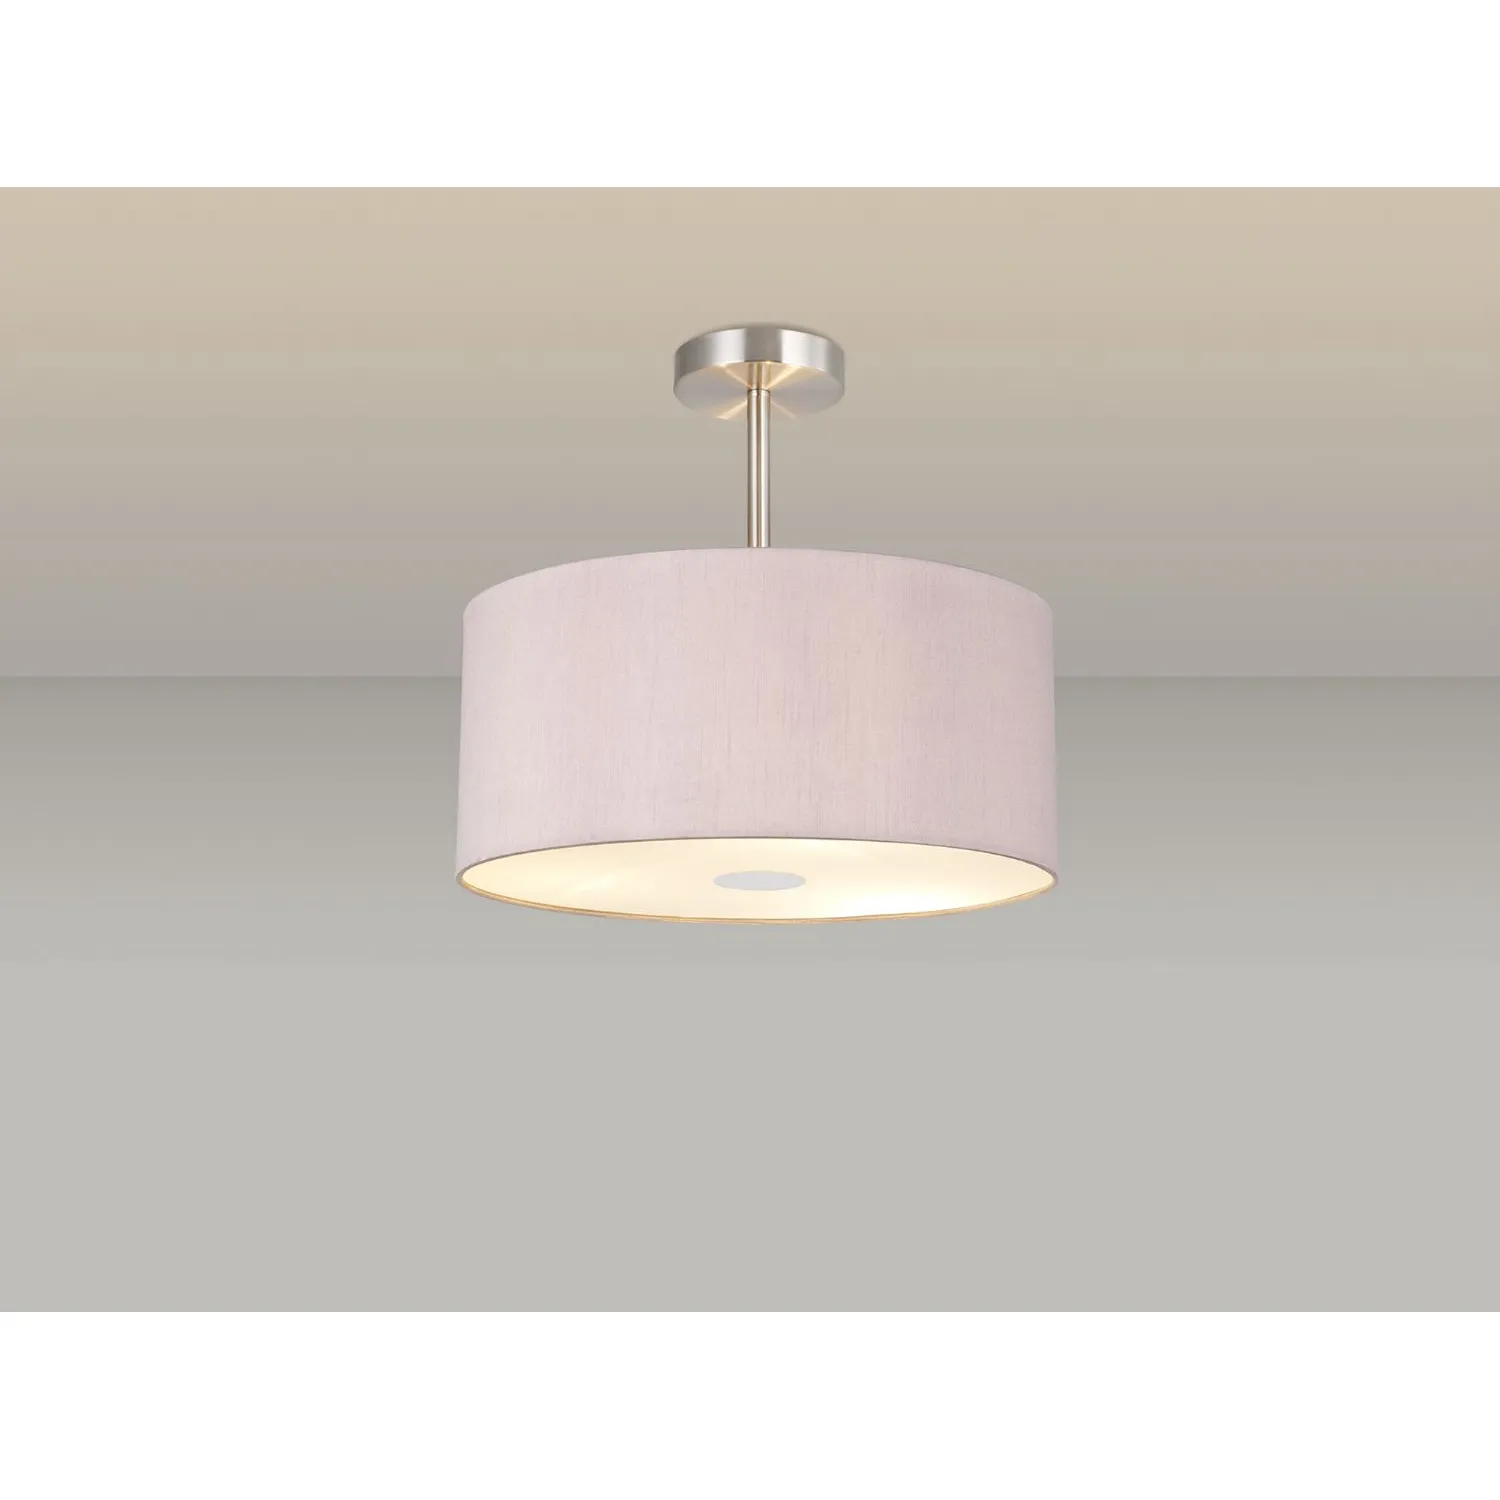 Baymont Polished Chrome 1 Light E27 Semi Flush c w 400mm Dual Faux Silk Shade, Taupe Halo Gold c w 400mm Frosted PC Acrylic Diffuser